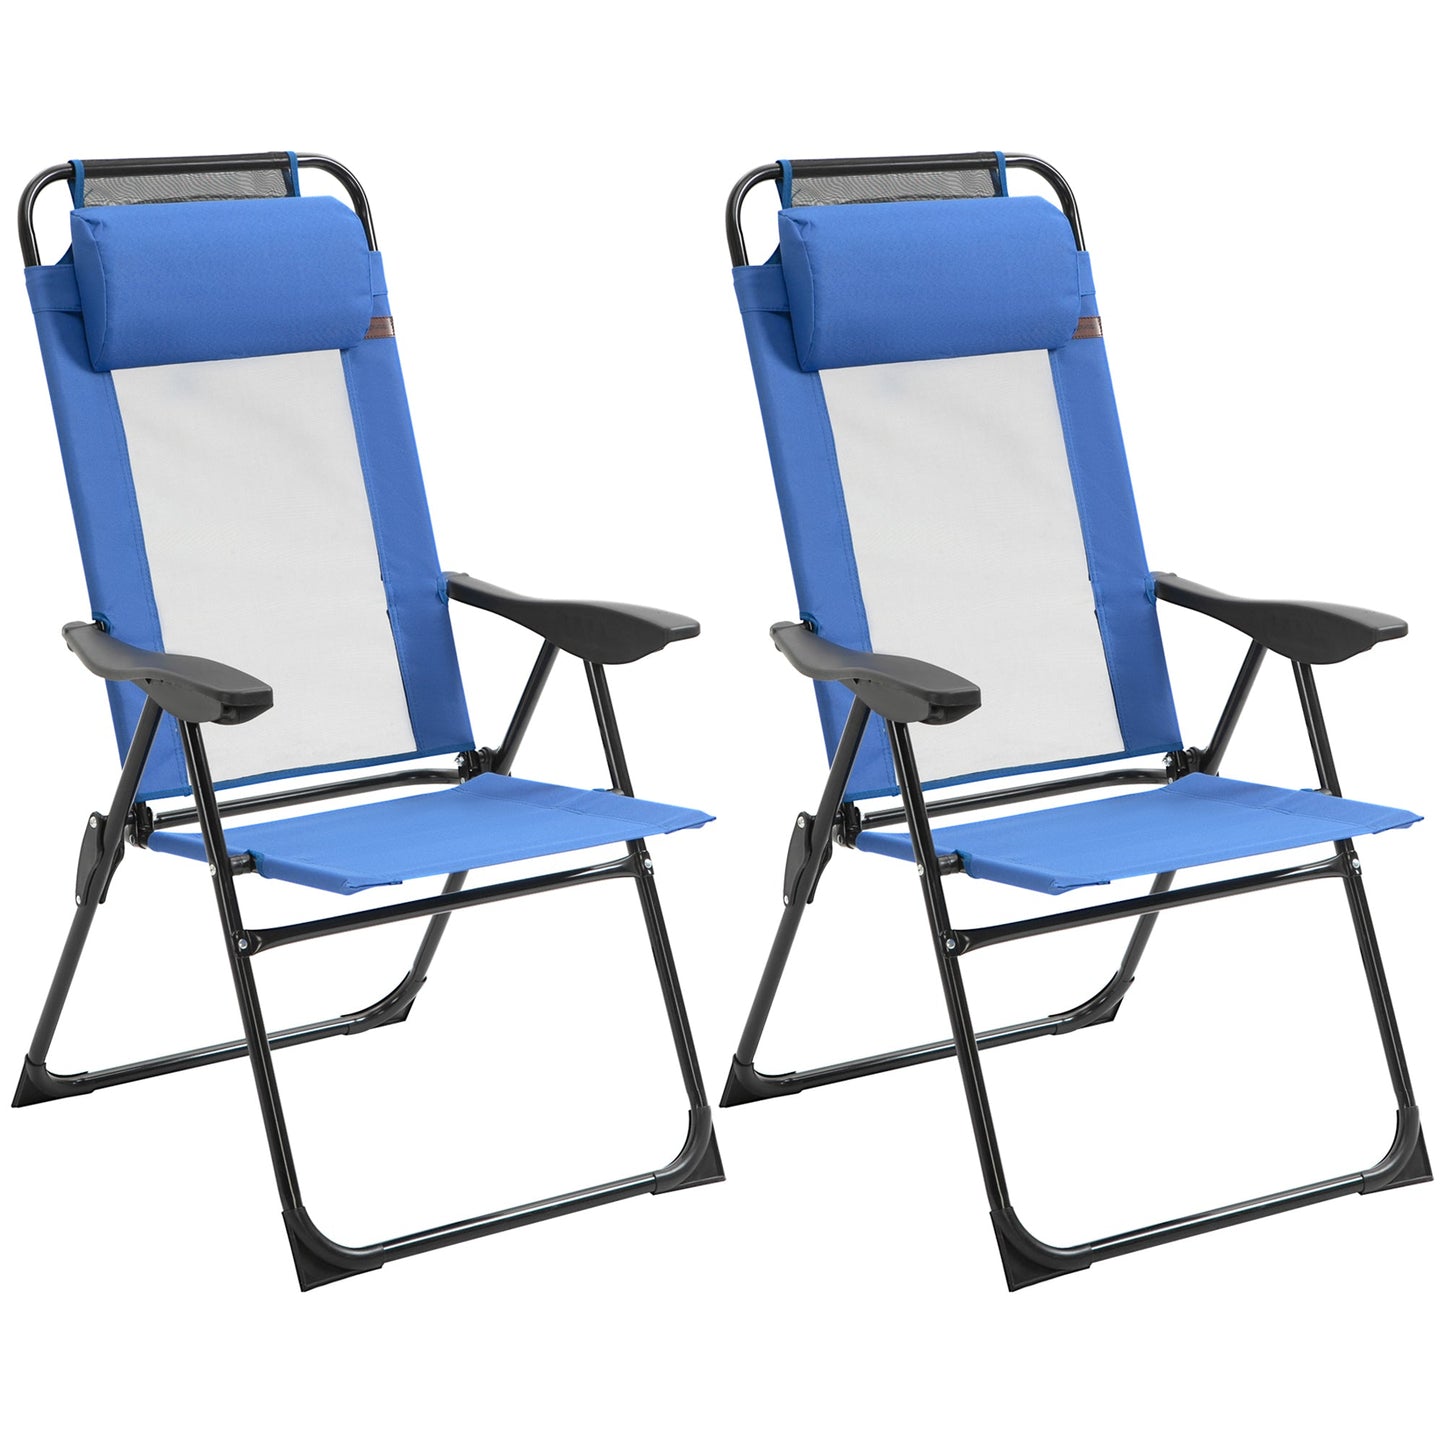 Outdoor and Garden-Set of 2 Portable Folding Recliner Outdoor Patio Chaise Lounge Chair with Adjustable Backrest, Blue - Outdoor Style Company